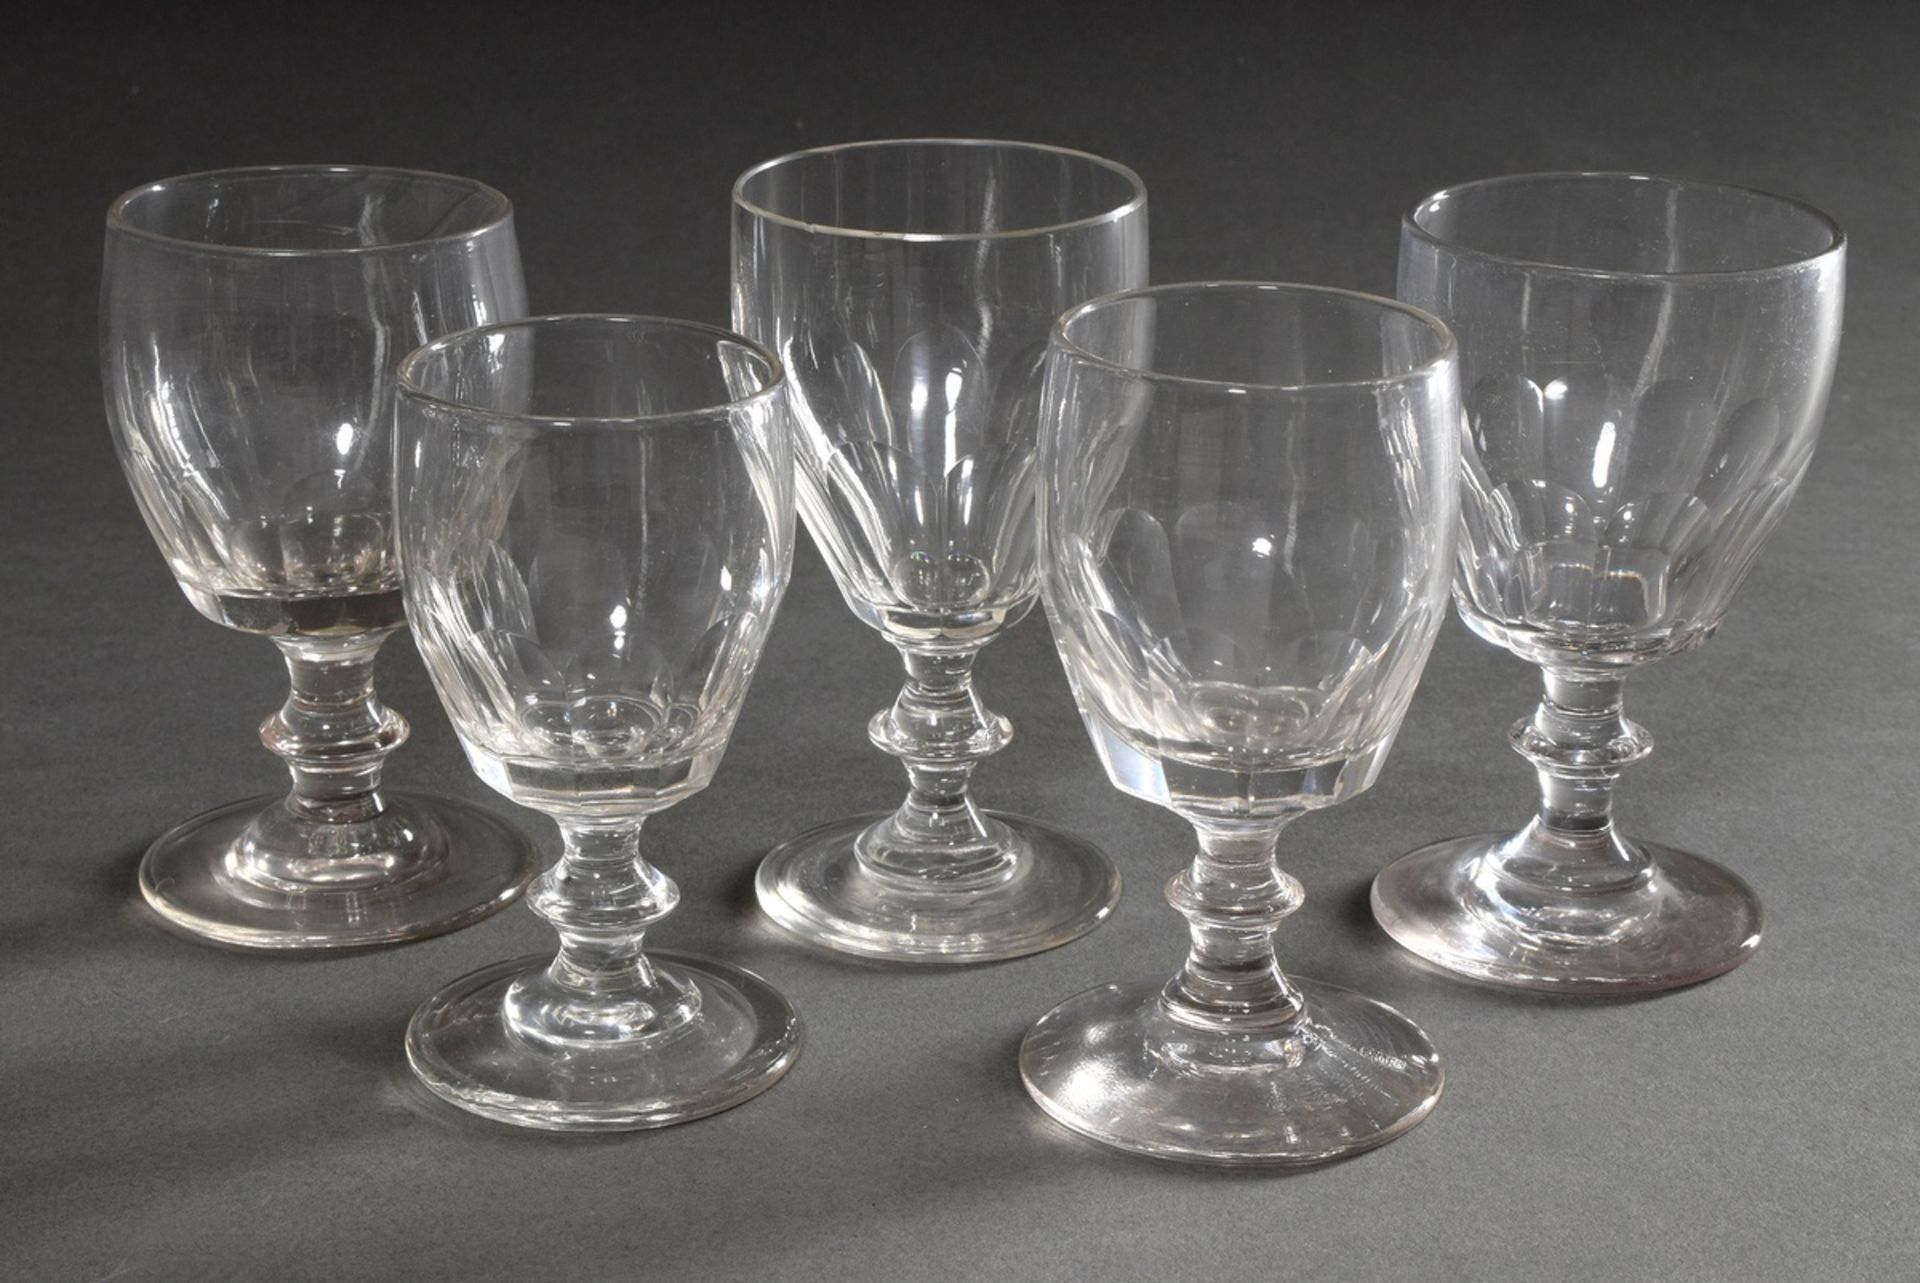 5 wine glasses with half surface cut and disc mode in the stem, colourless glass, varying in height